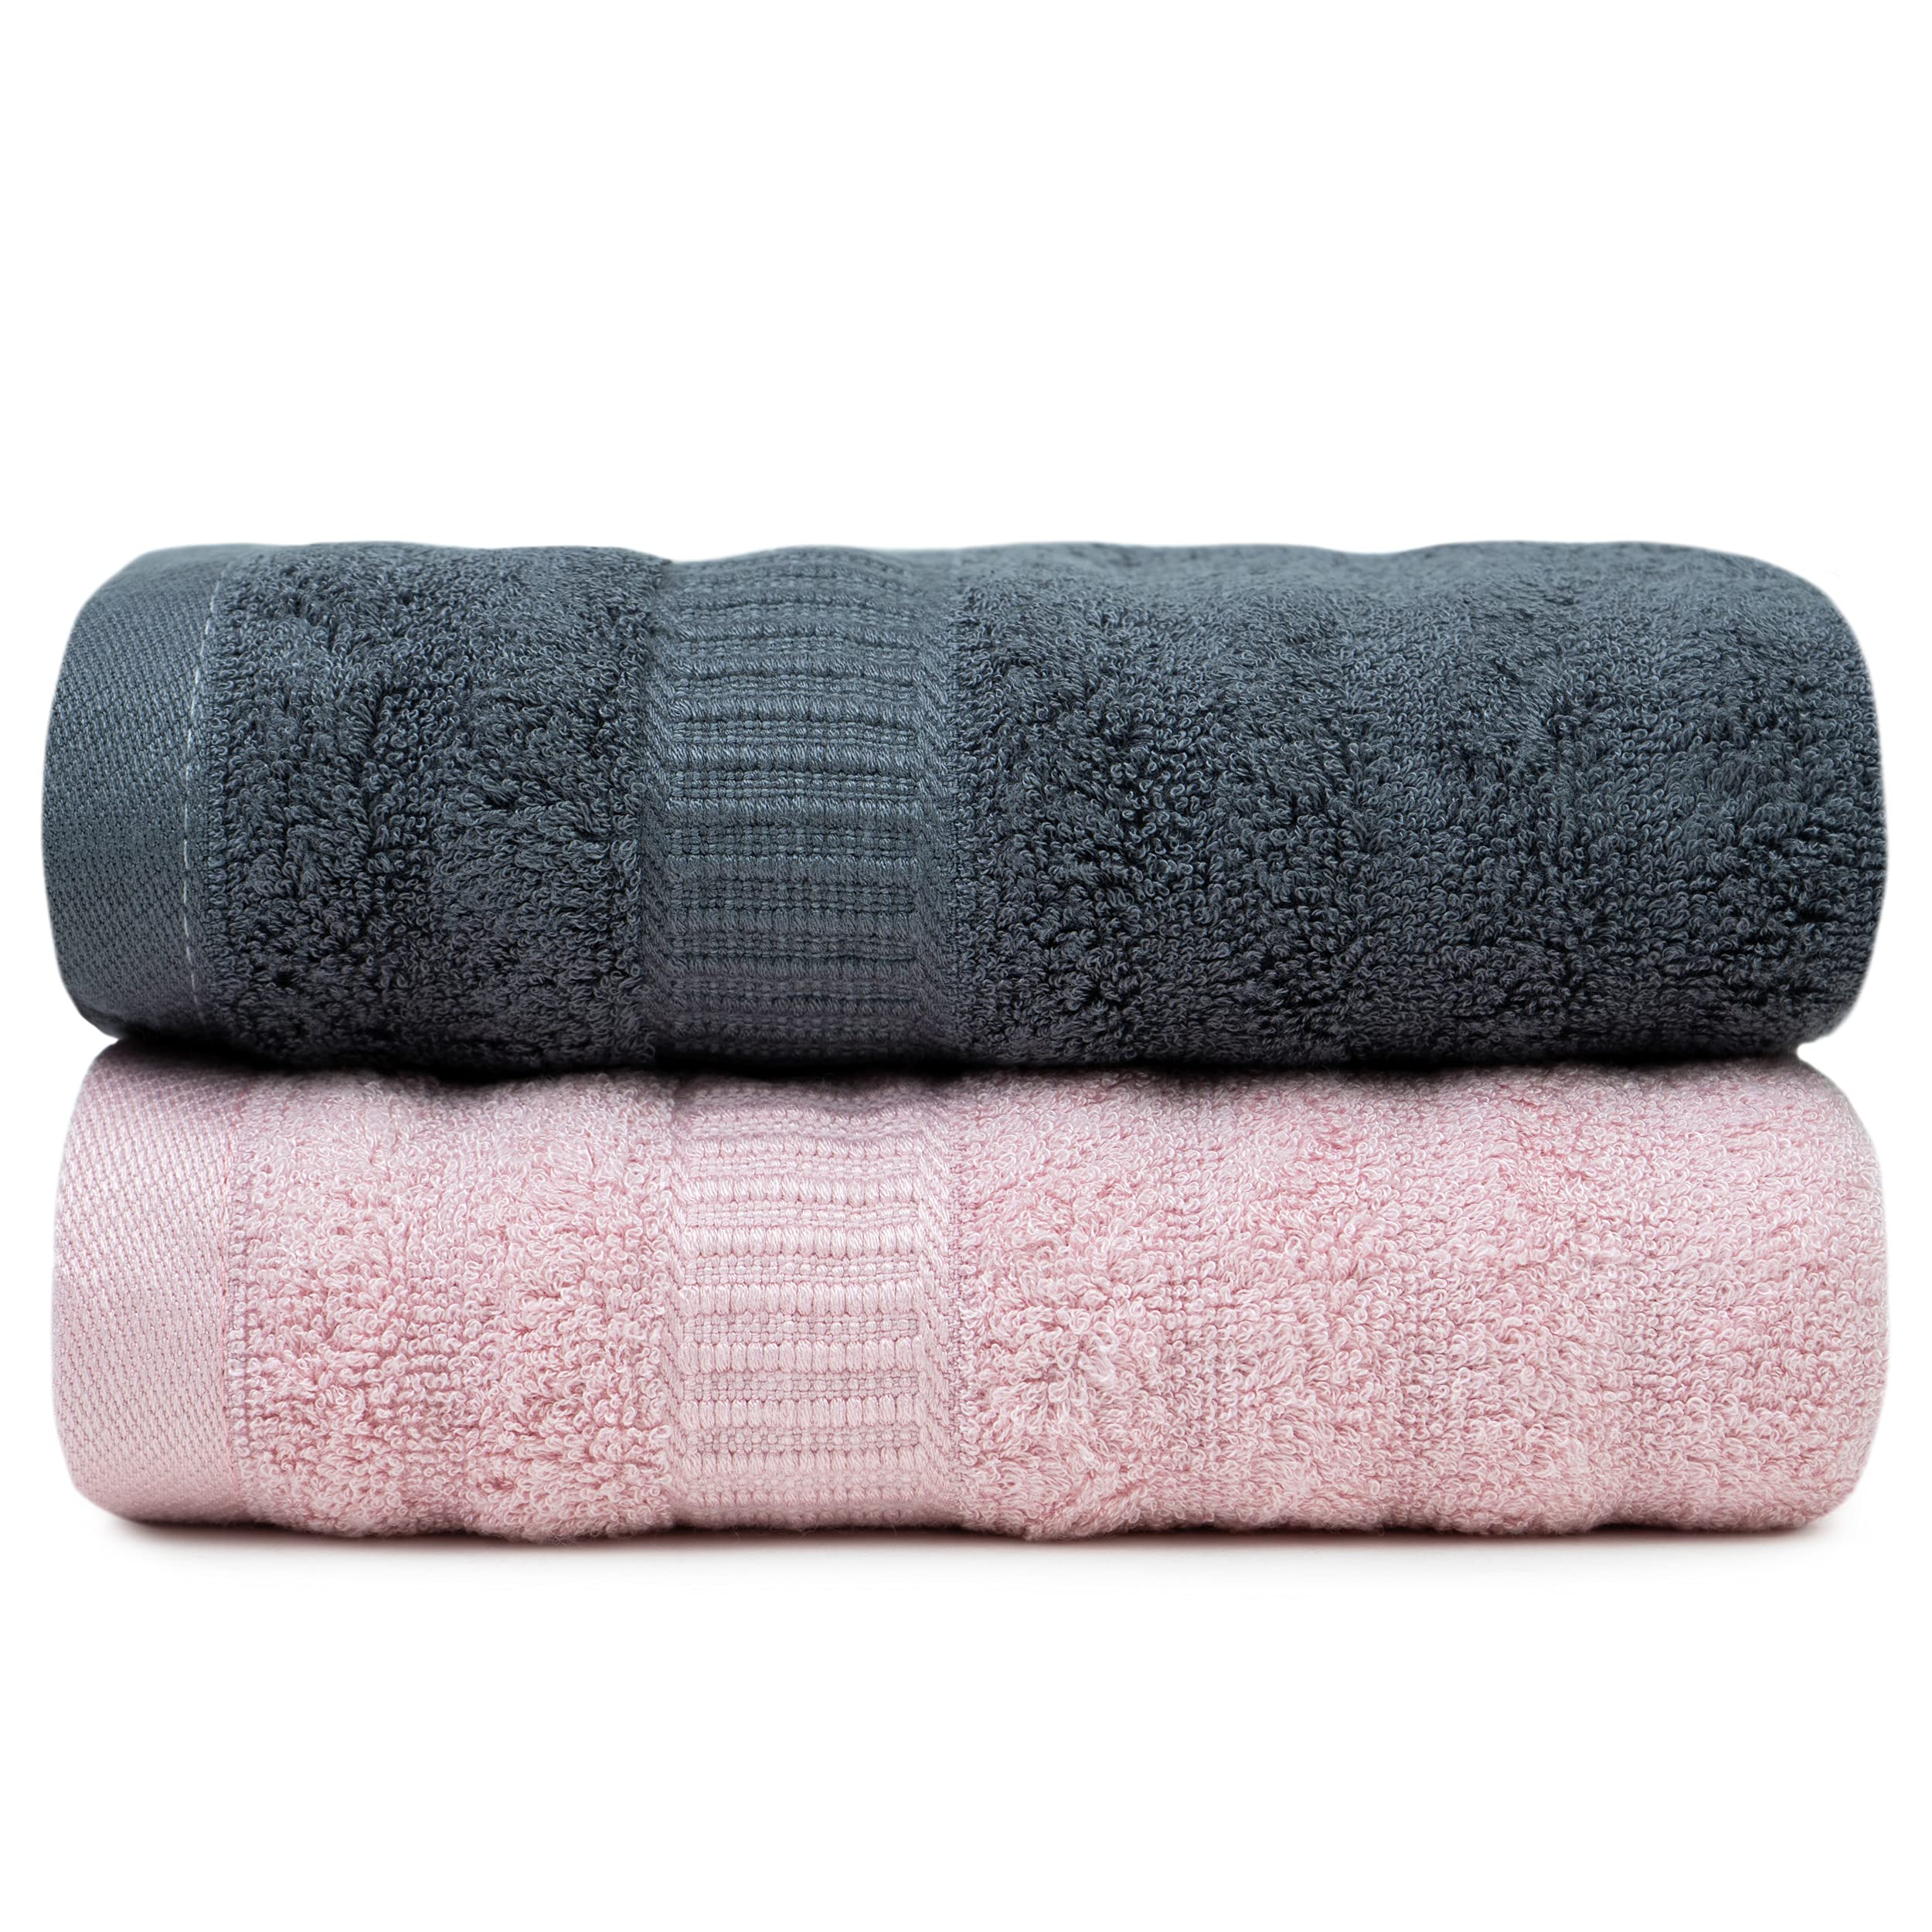 Mush 600 GSM Hand Towel Set of 2 | 100% Bamboo Hand Towel |Ultra Soft, Absorbent & Quick Dry Towel for Gym, Pool, Travel, Spa and Yoga | 29.5 x 14 Inches (Pink & Grey)